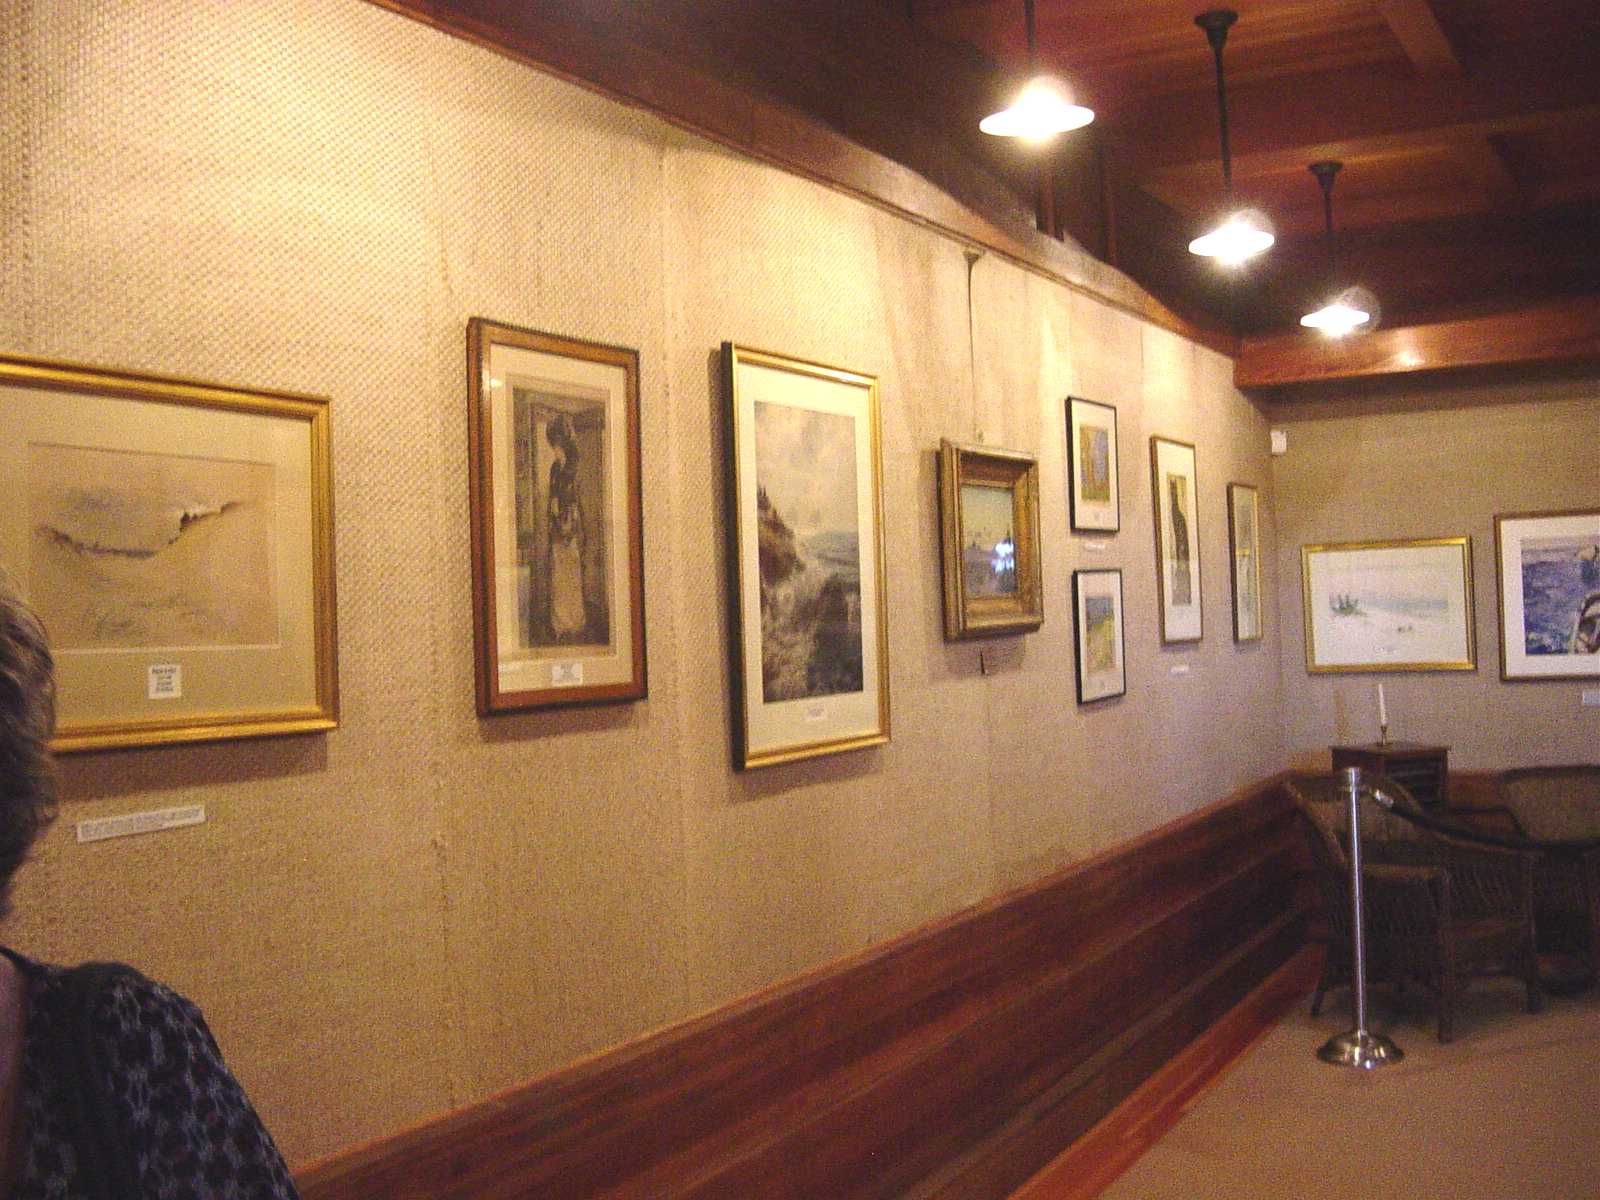 Some of Gillette's oil painting collection